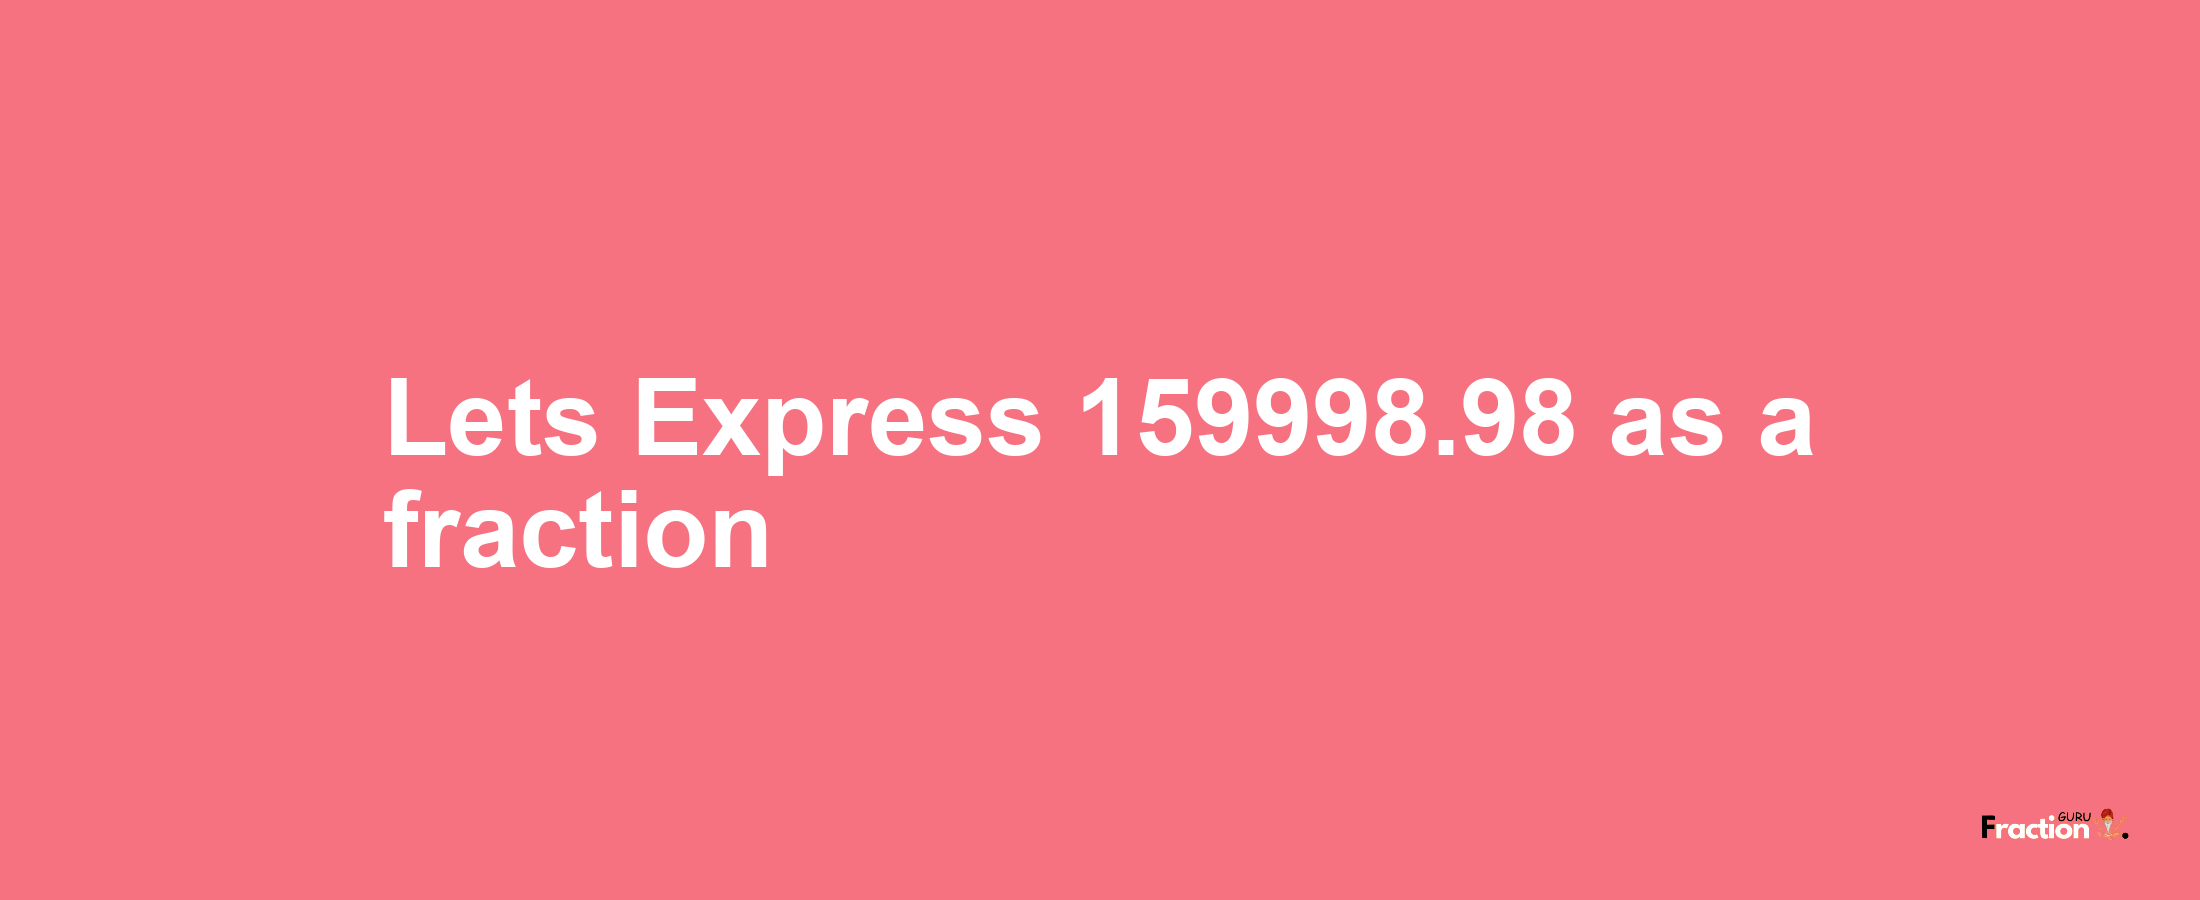 Lets Express 159998.98 as afraction